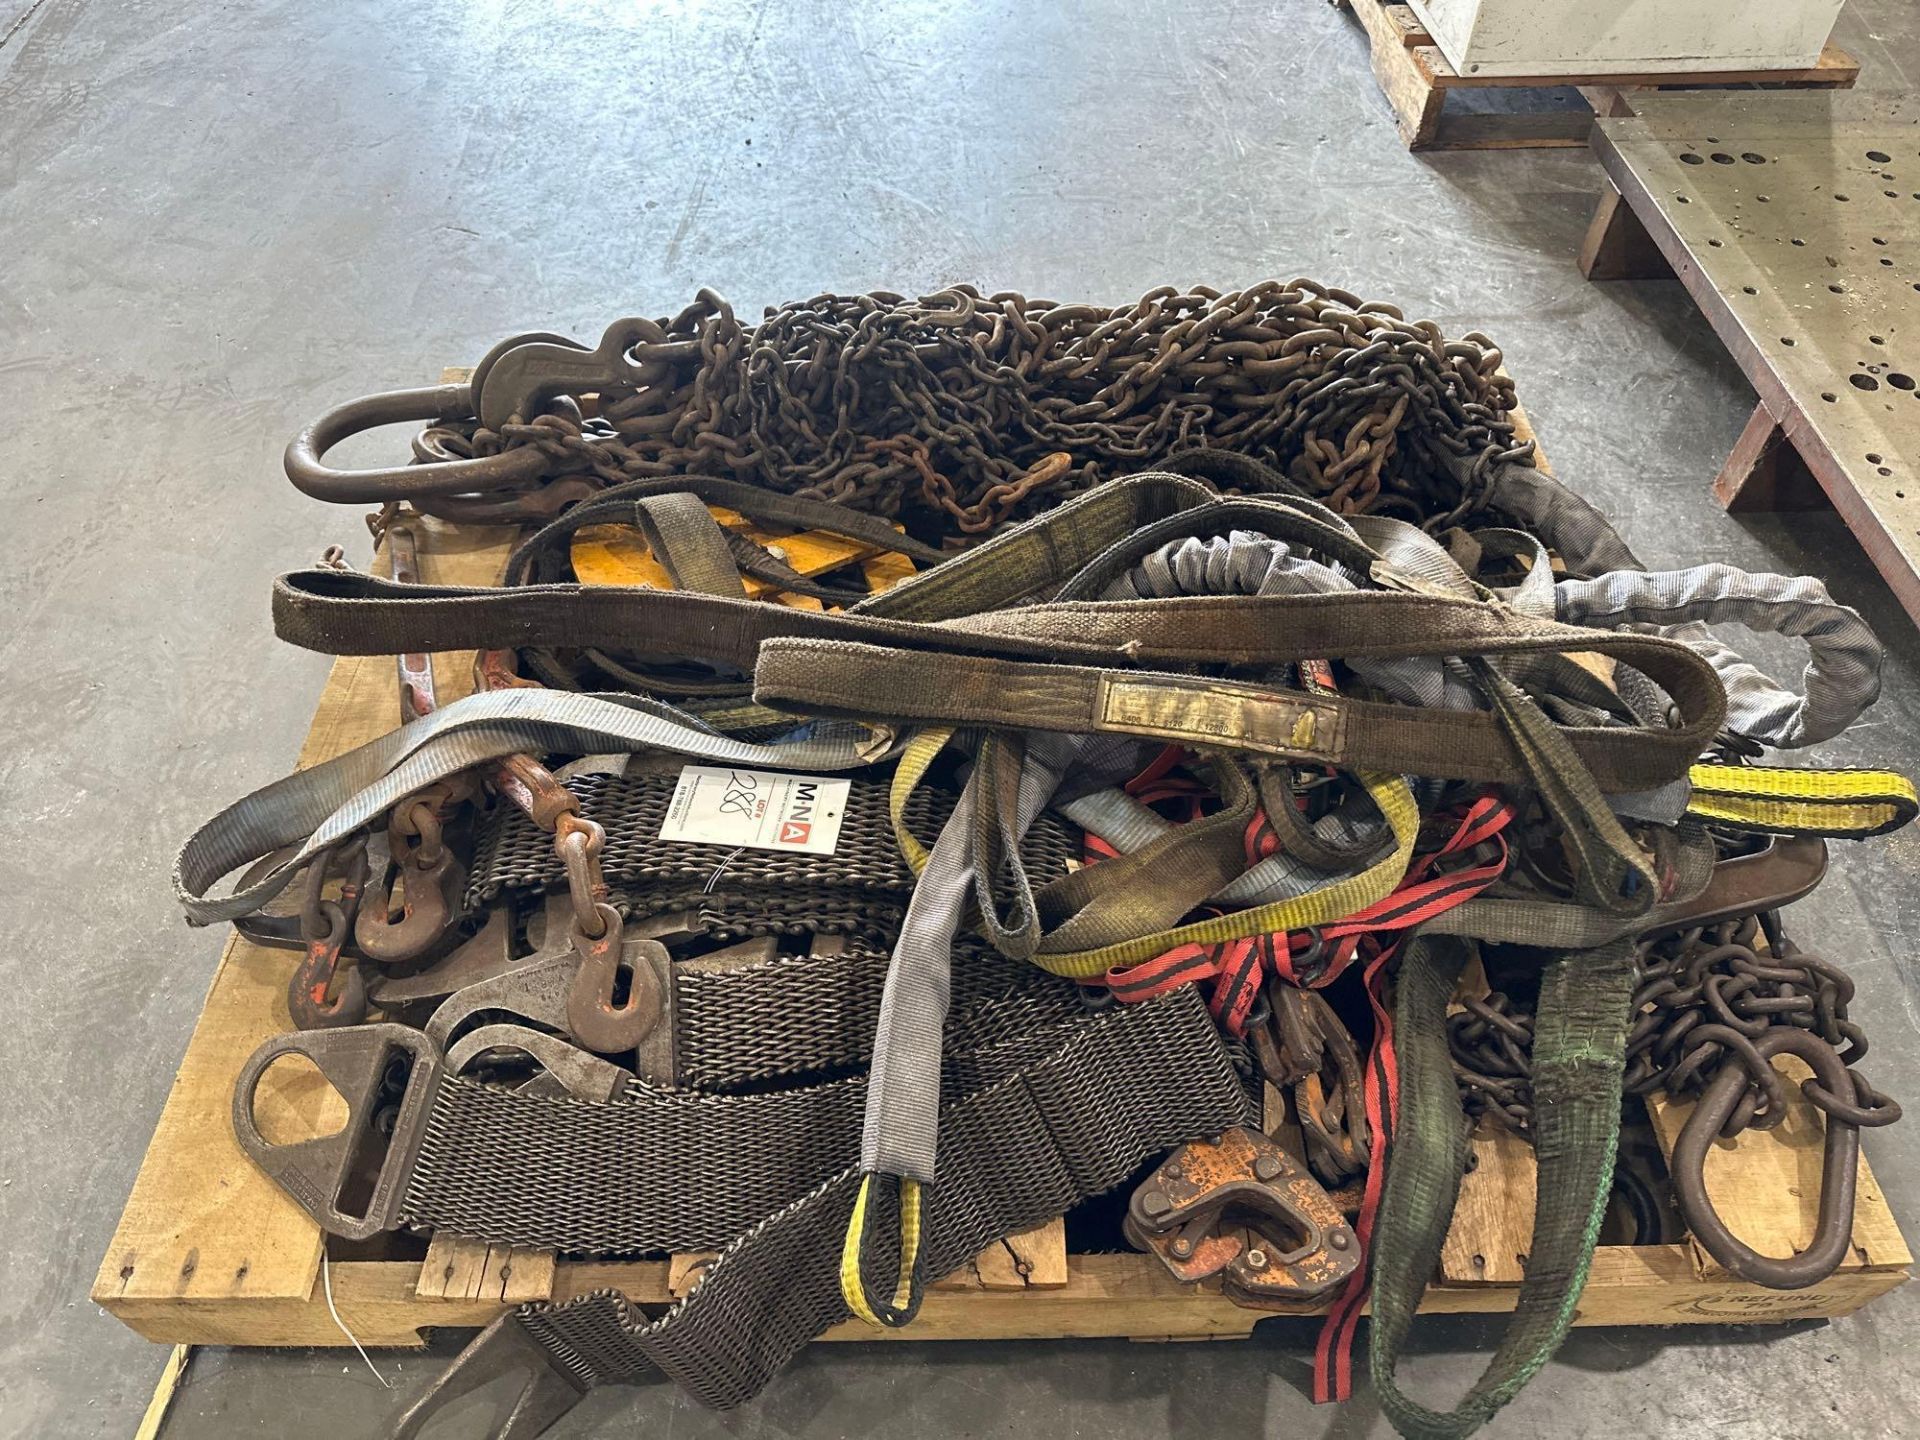 Assorted Chains, Hooks, Chain & Nylon Straps, Pallet Pullers - Image 3 of 4